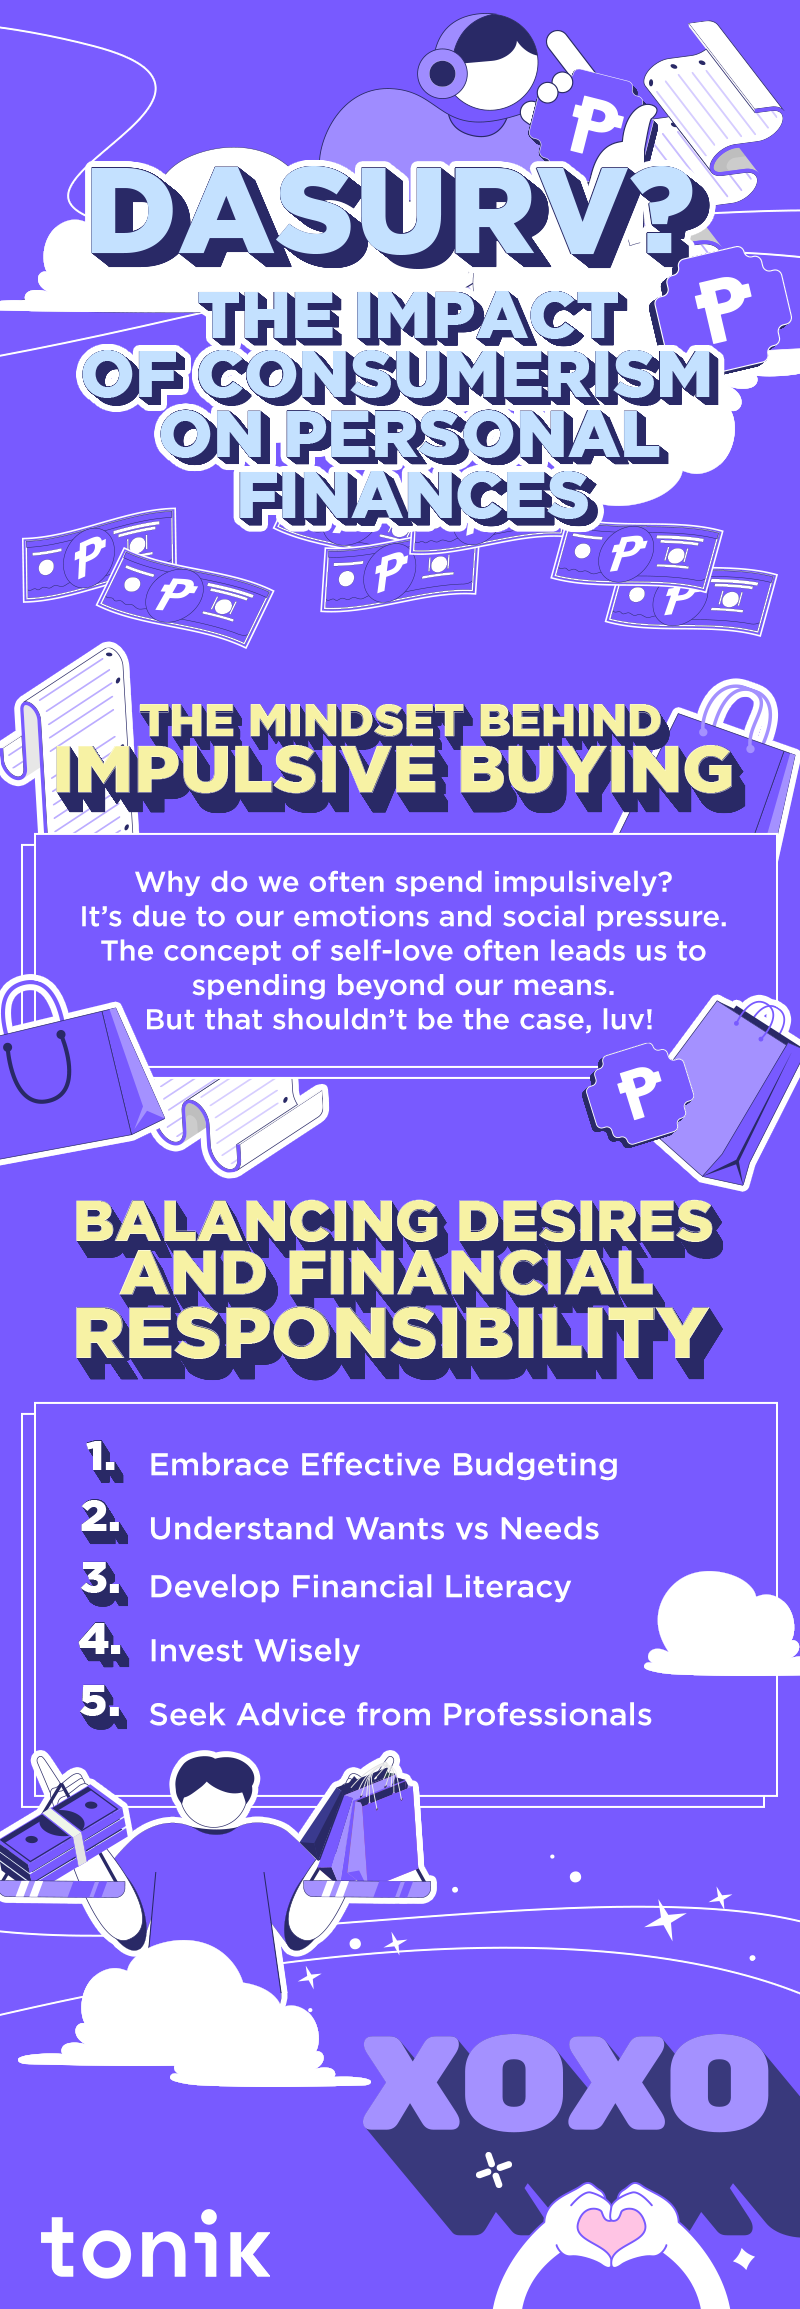 infographic on impact of consumerism on personal finances